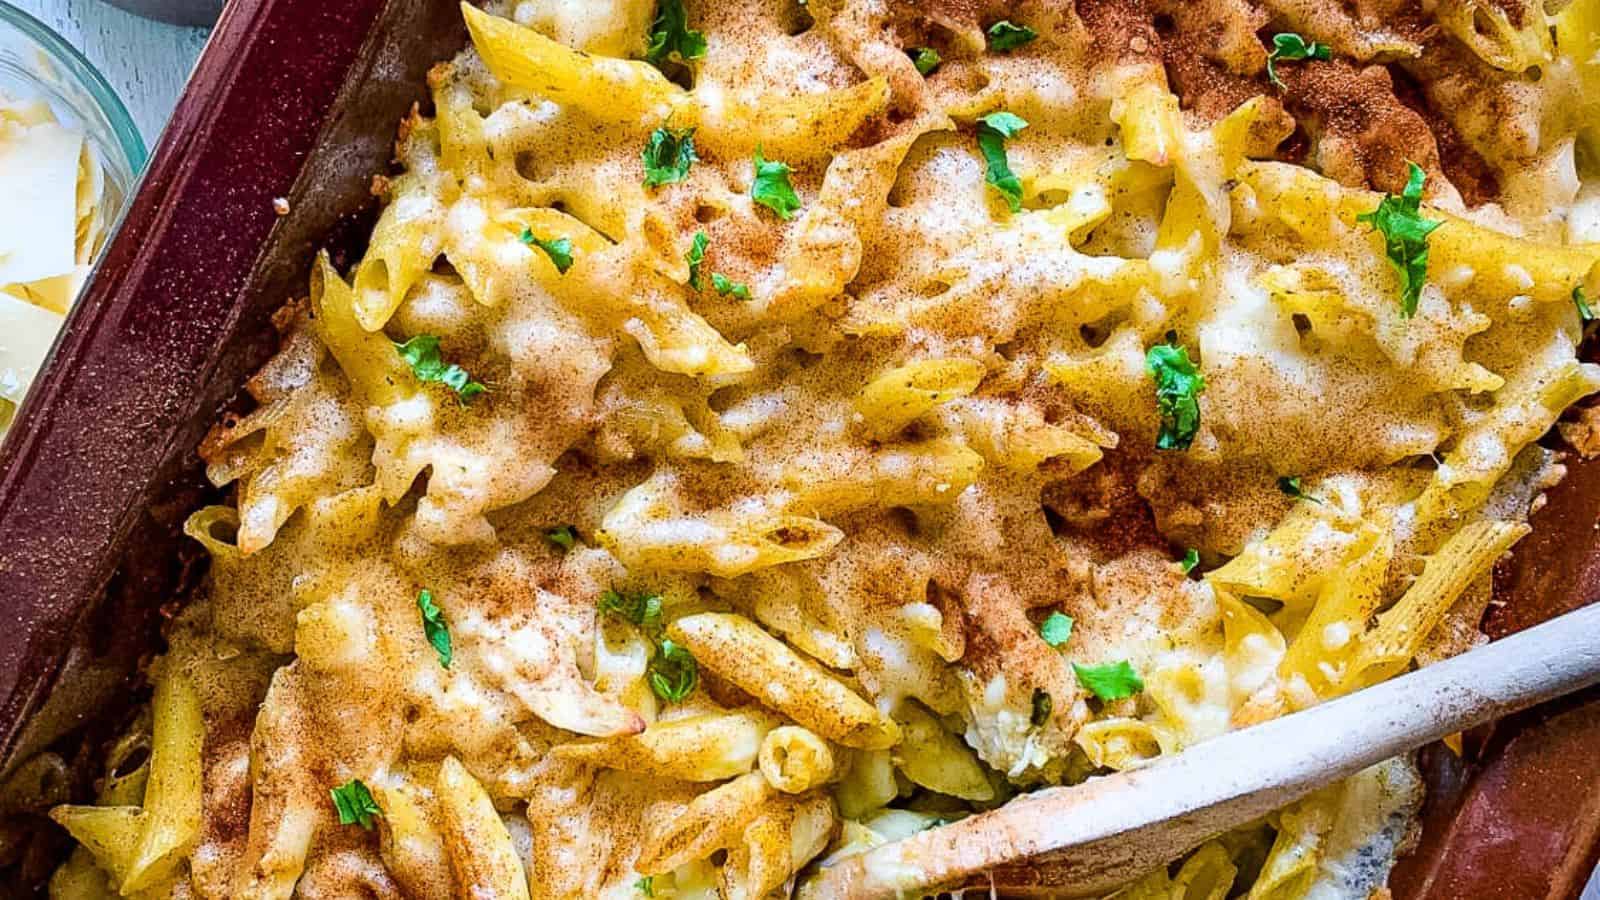 Penne and chicken in a casserole dish with pesto and cheese.